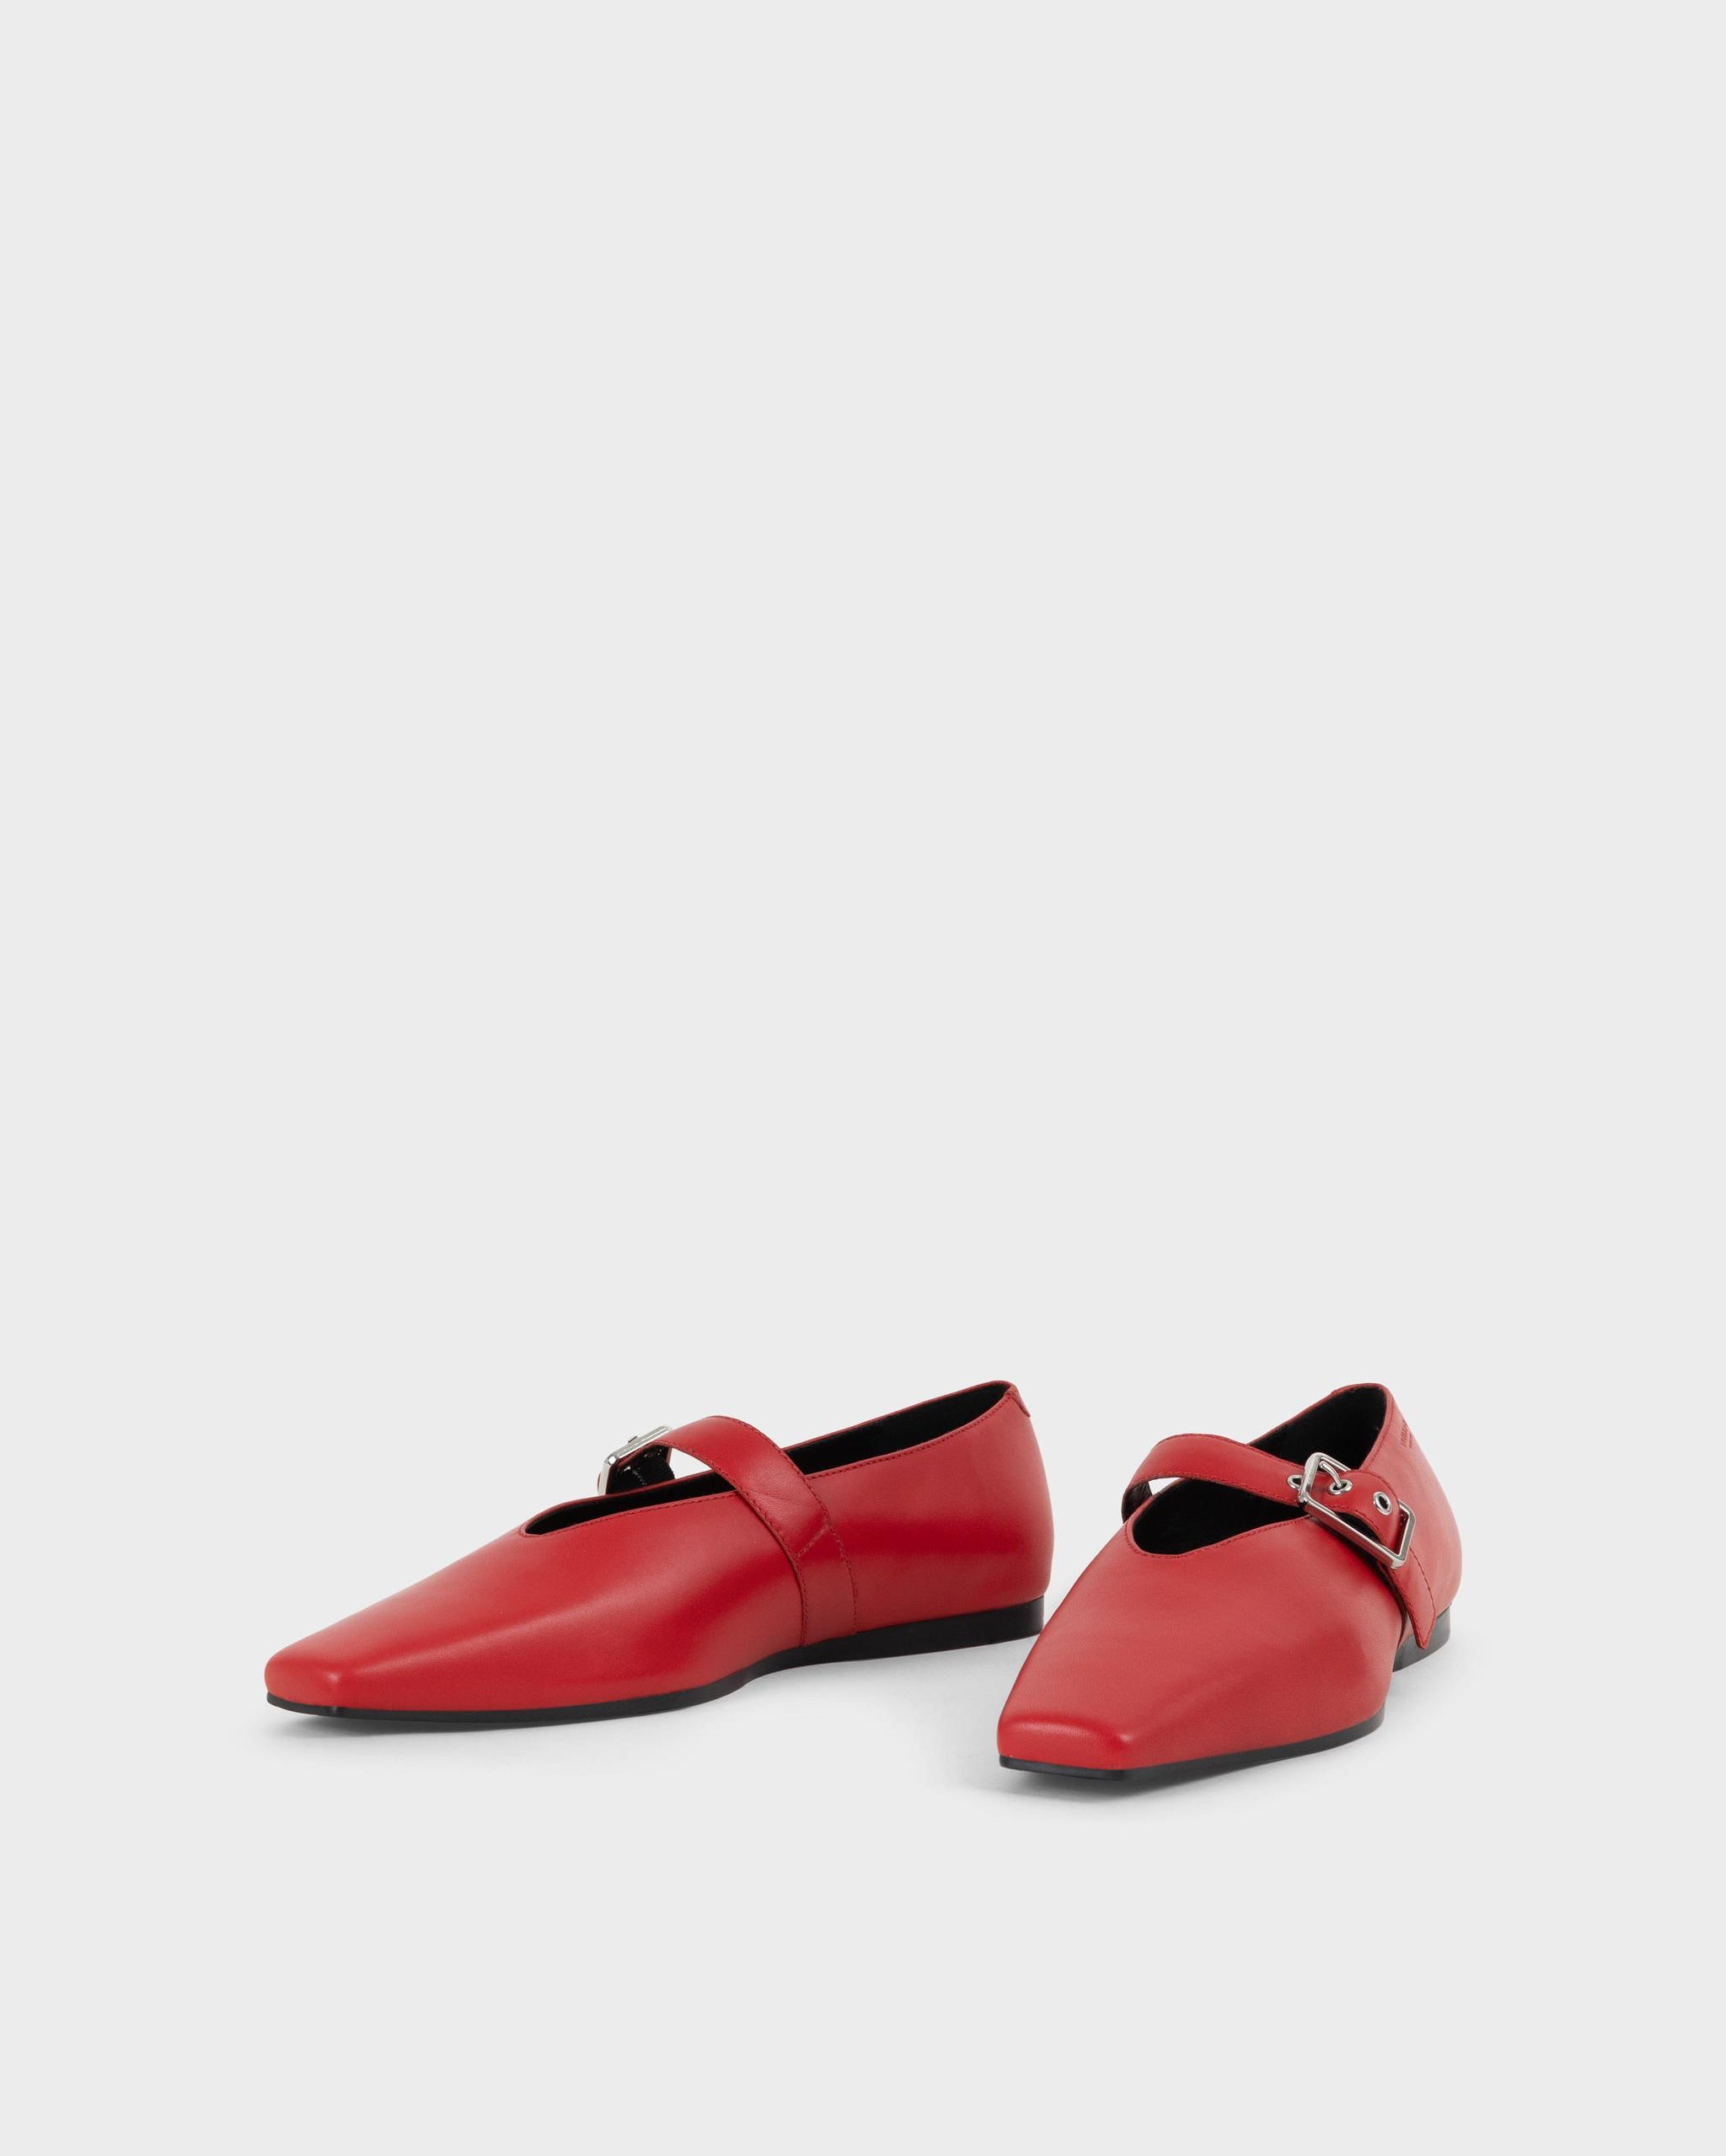 Wioletta (5701-201-48) Shoes - Red